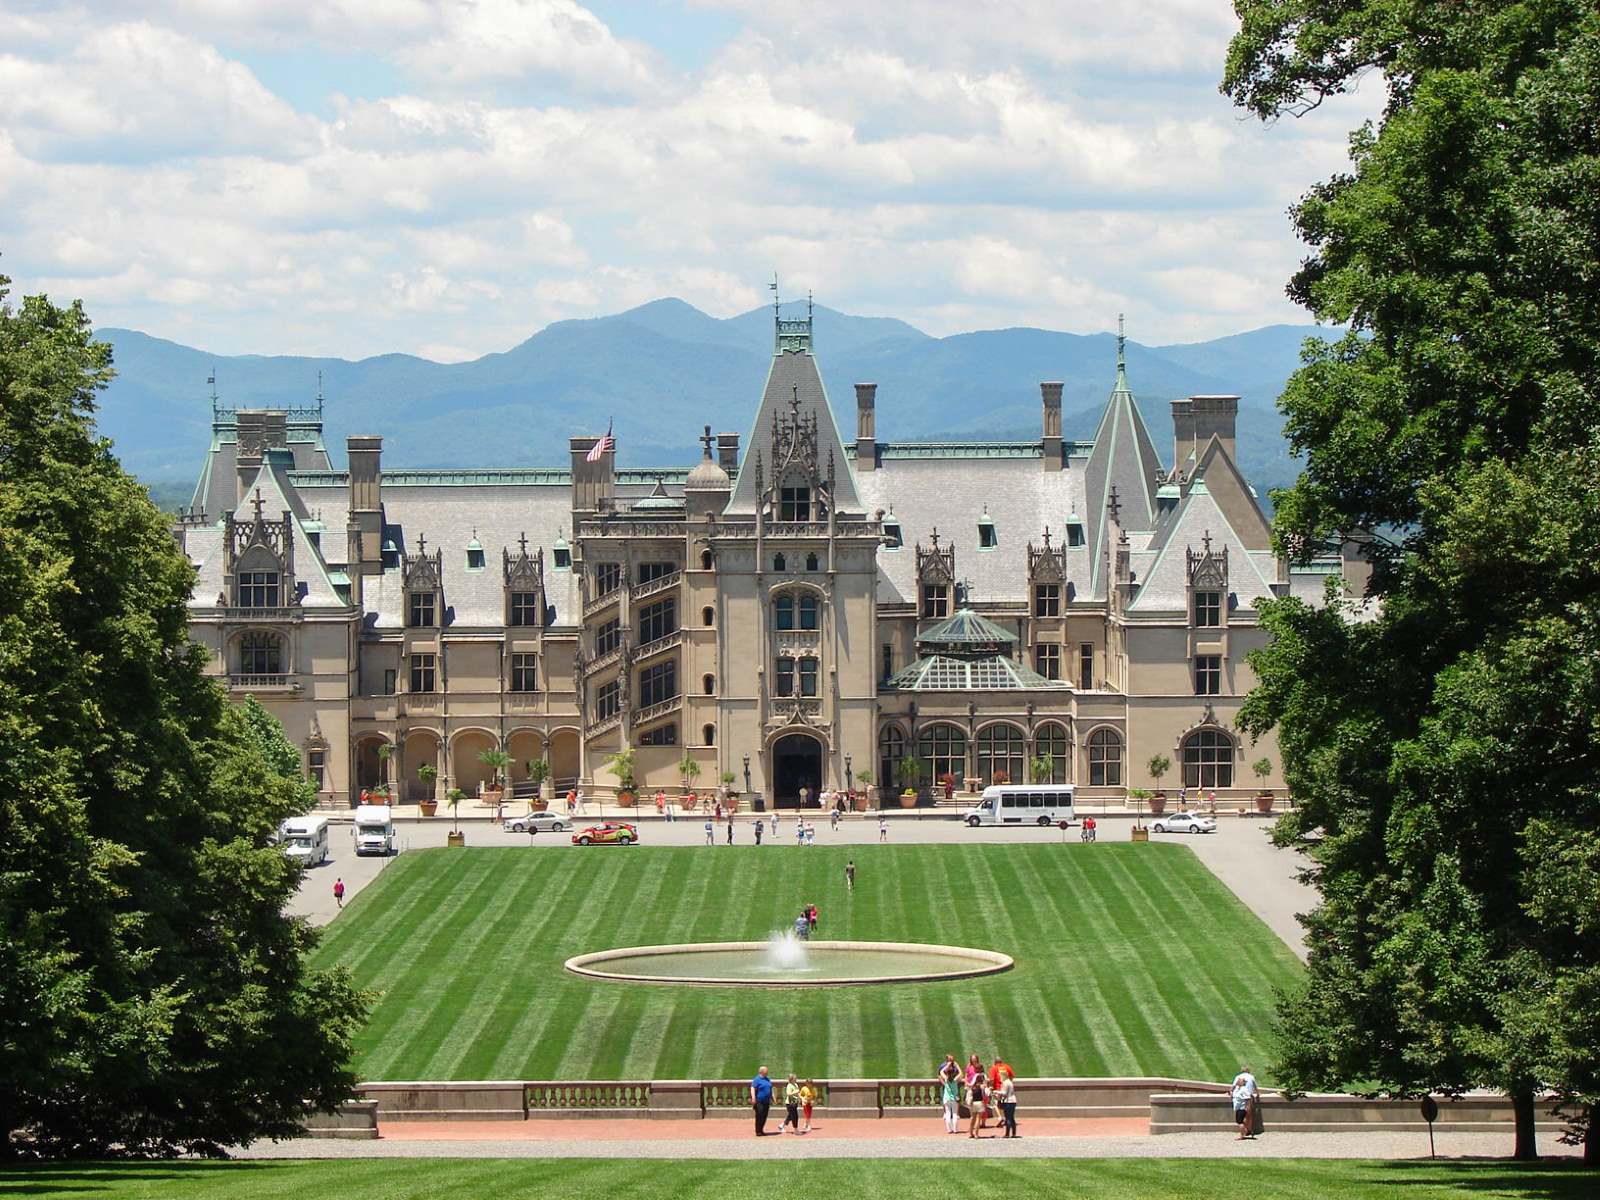 Who Competed To Design The Biltmore House?